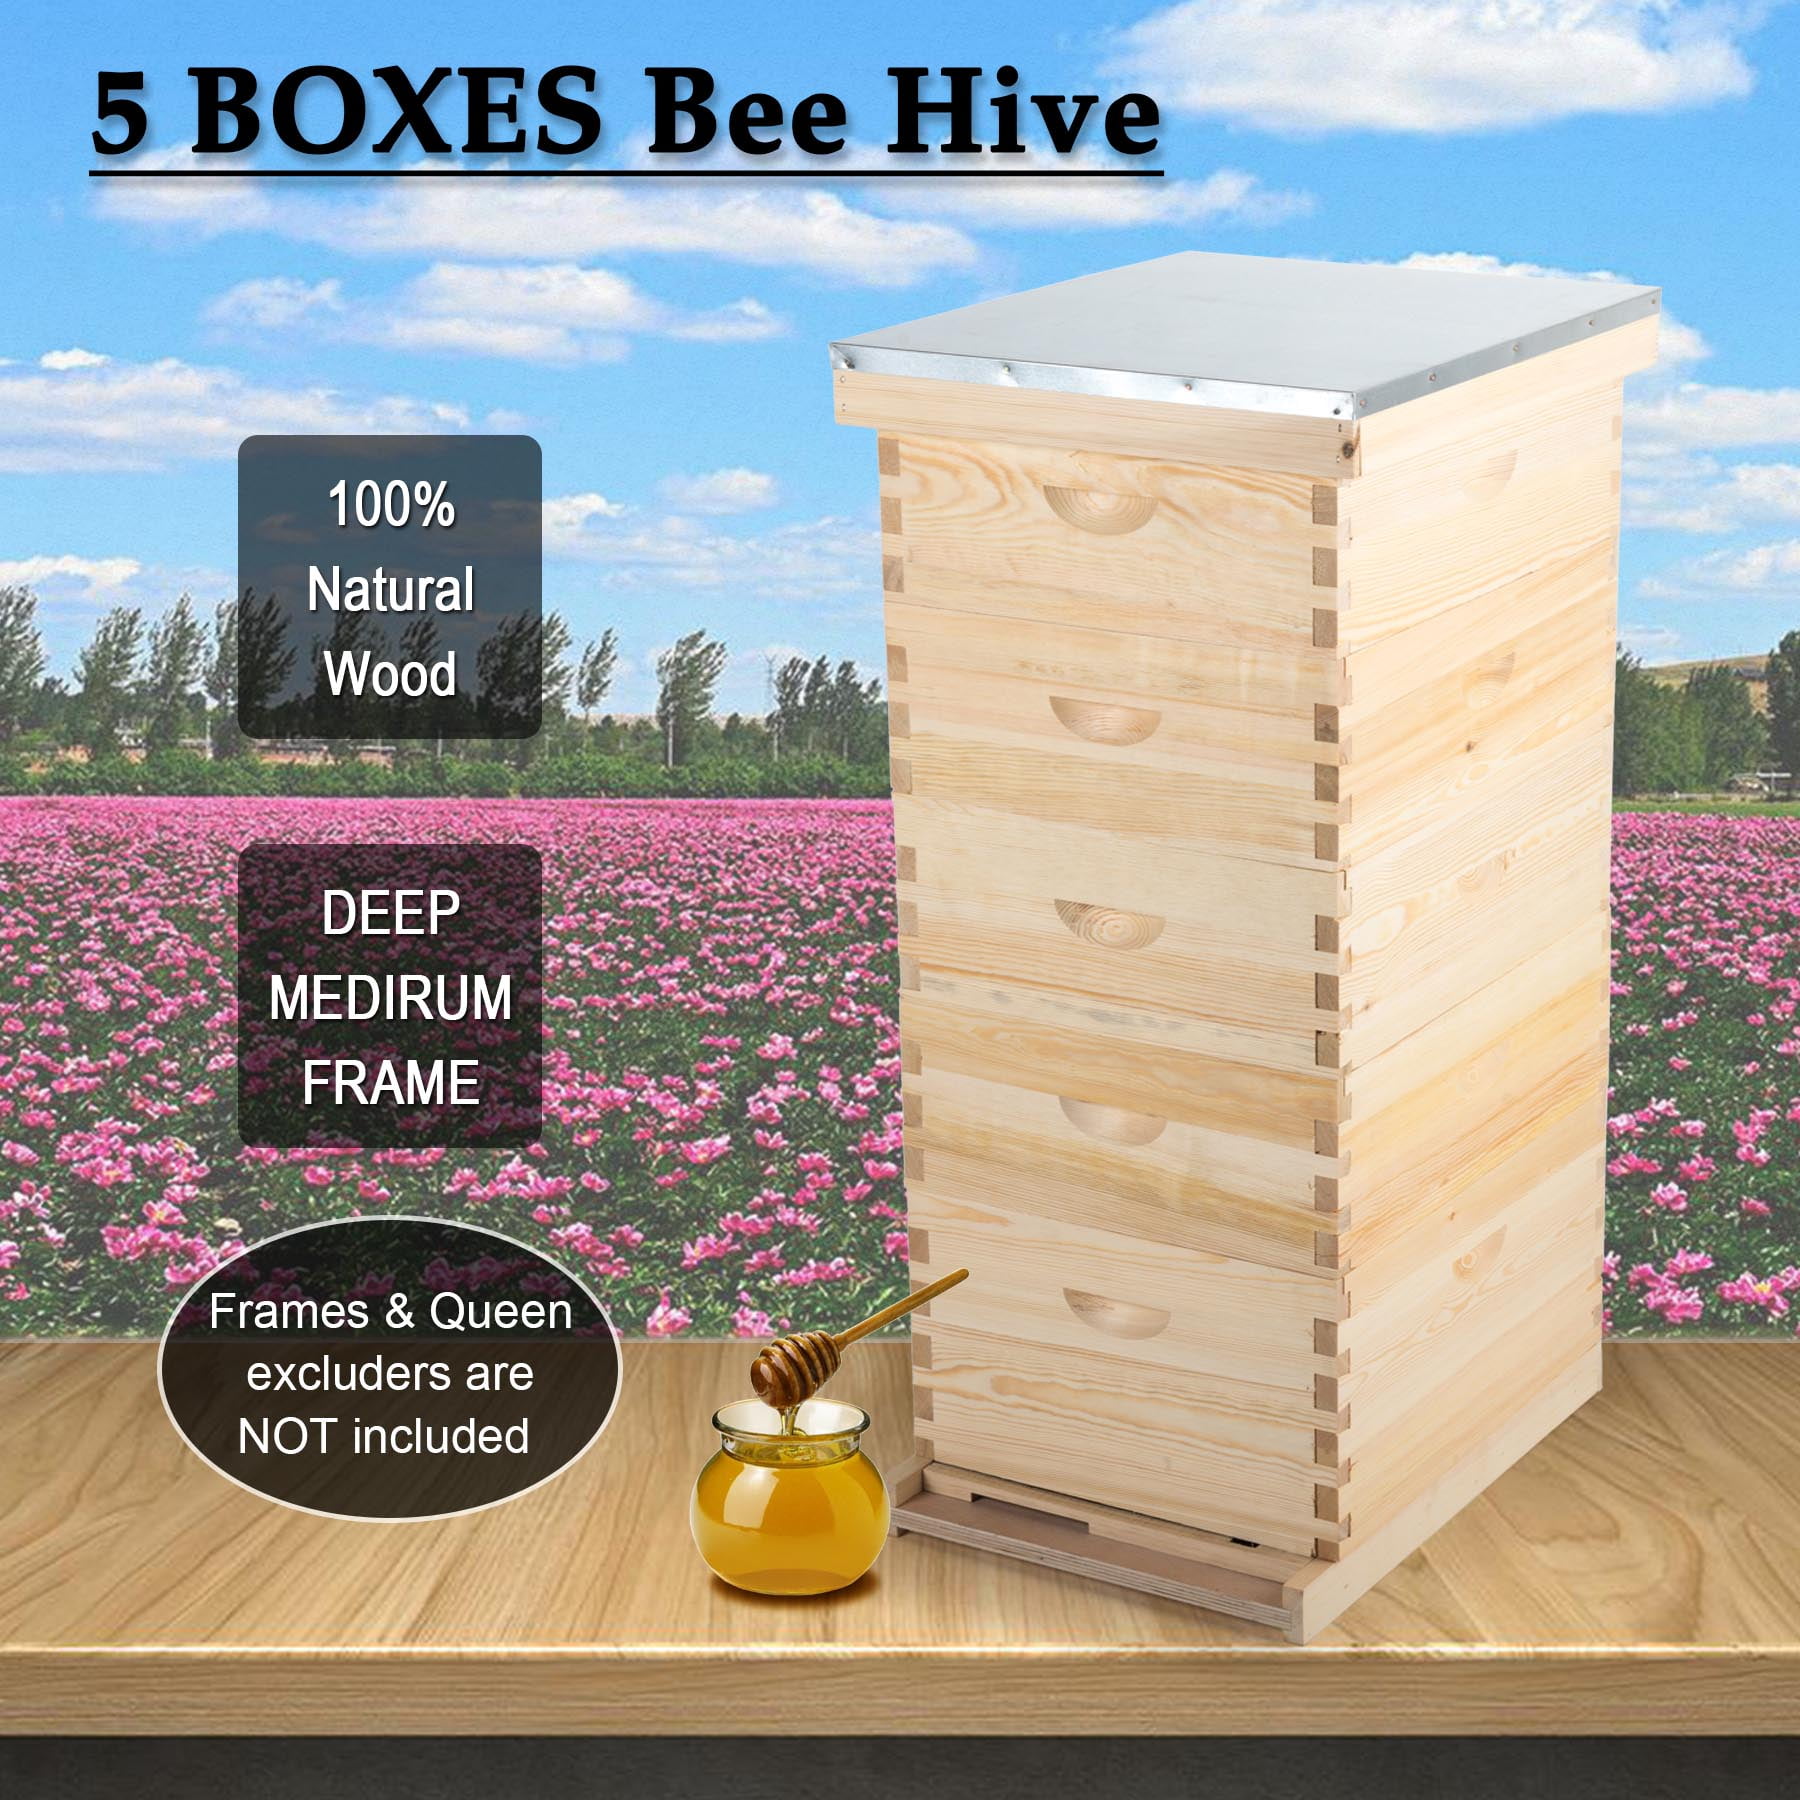 10-Frame Size 5 Box Bee Hive Frame/Beehive Frames w/ Metal Roof Queen Excluder 